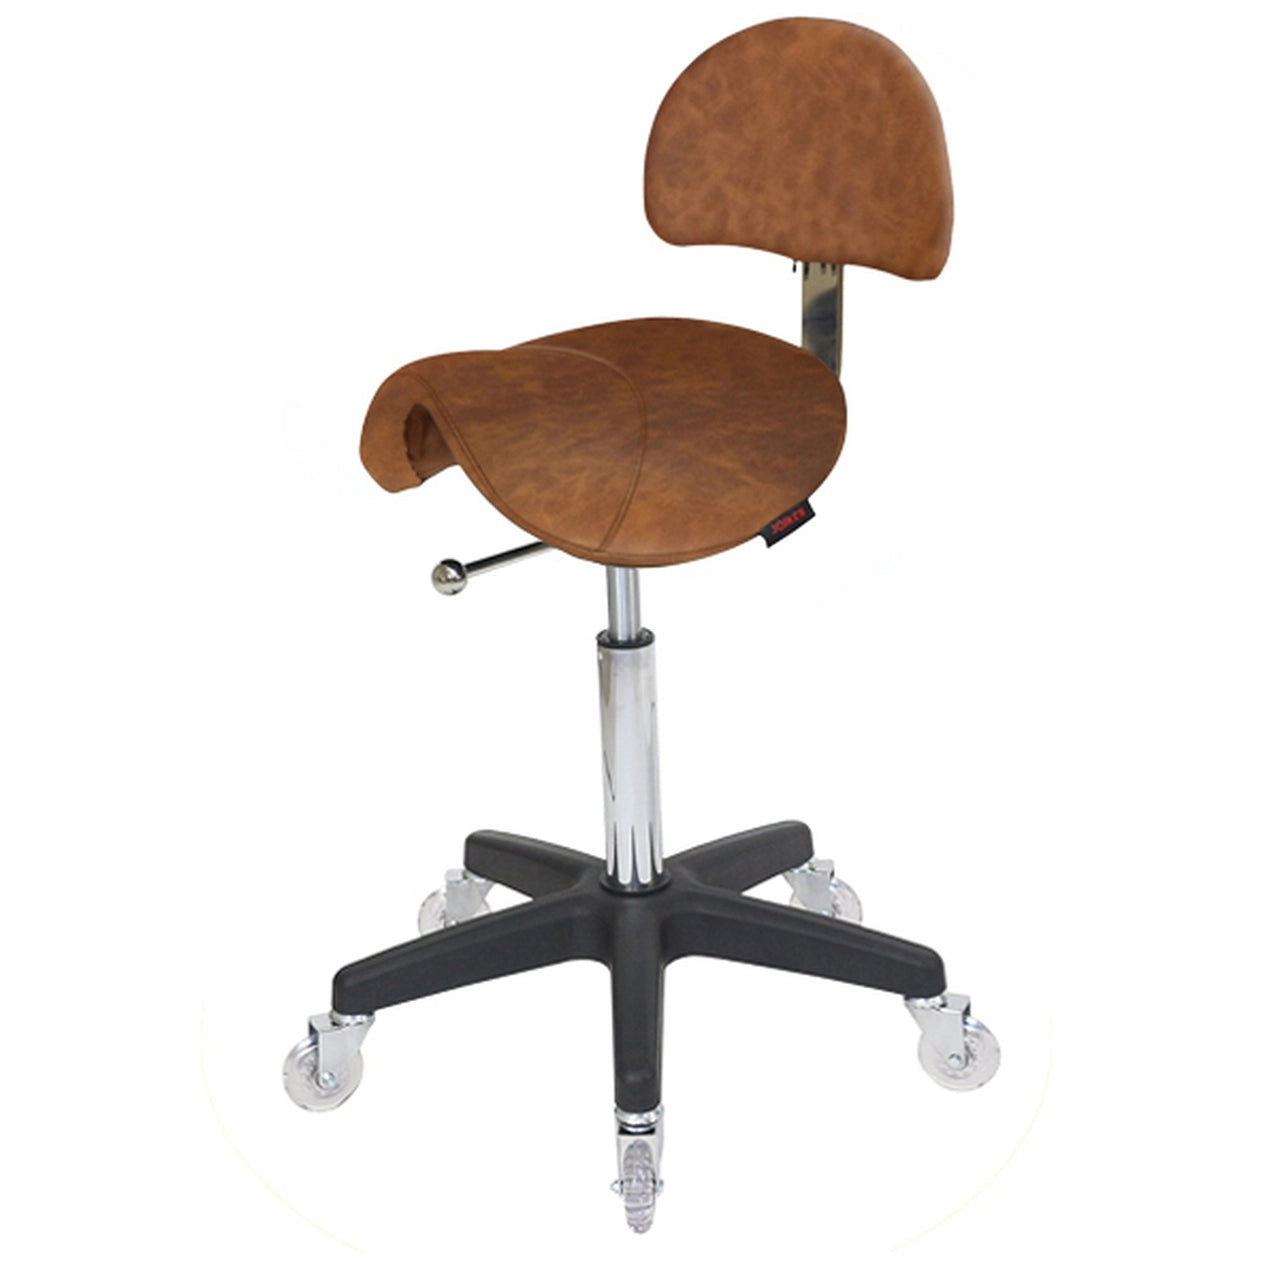 Joiken Saddle Stool with Clear Wheels